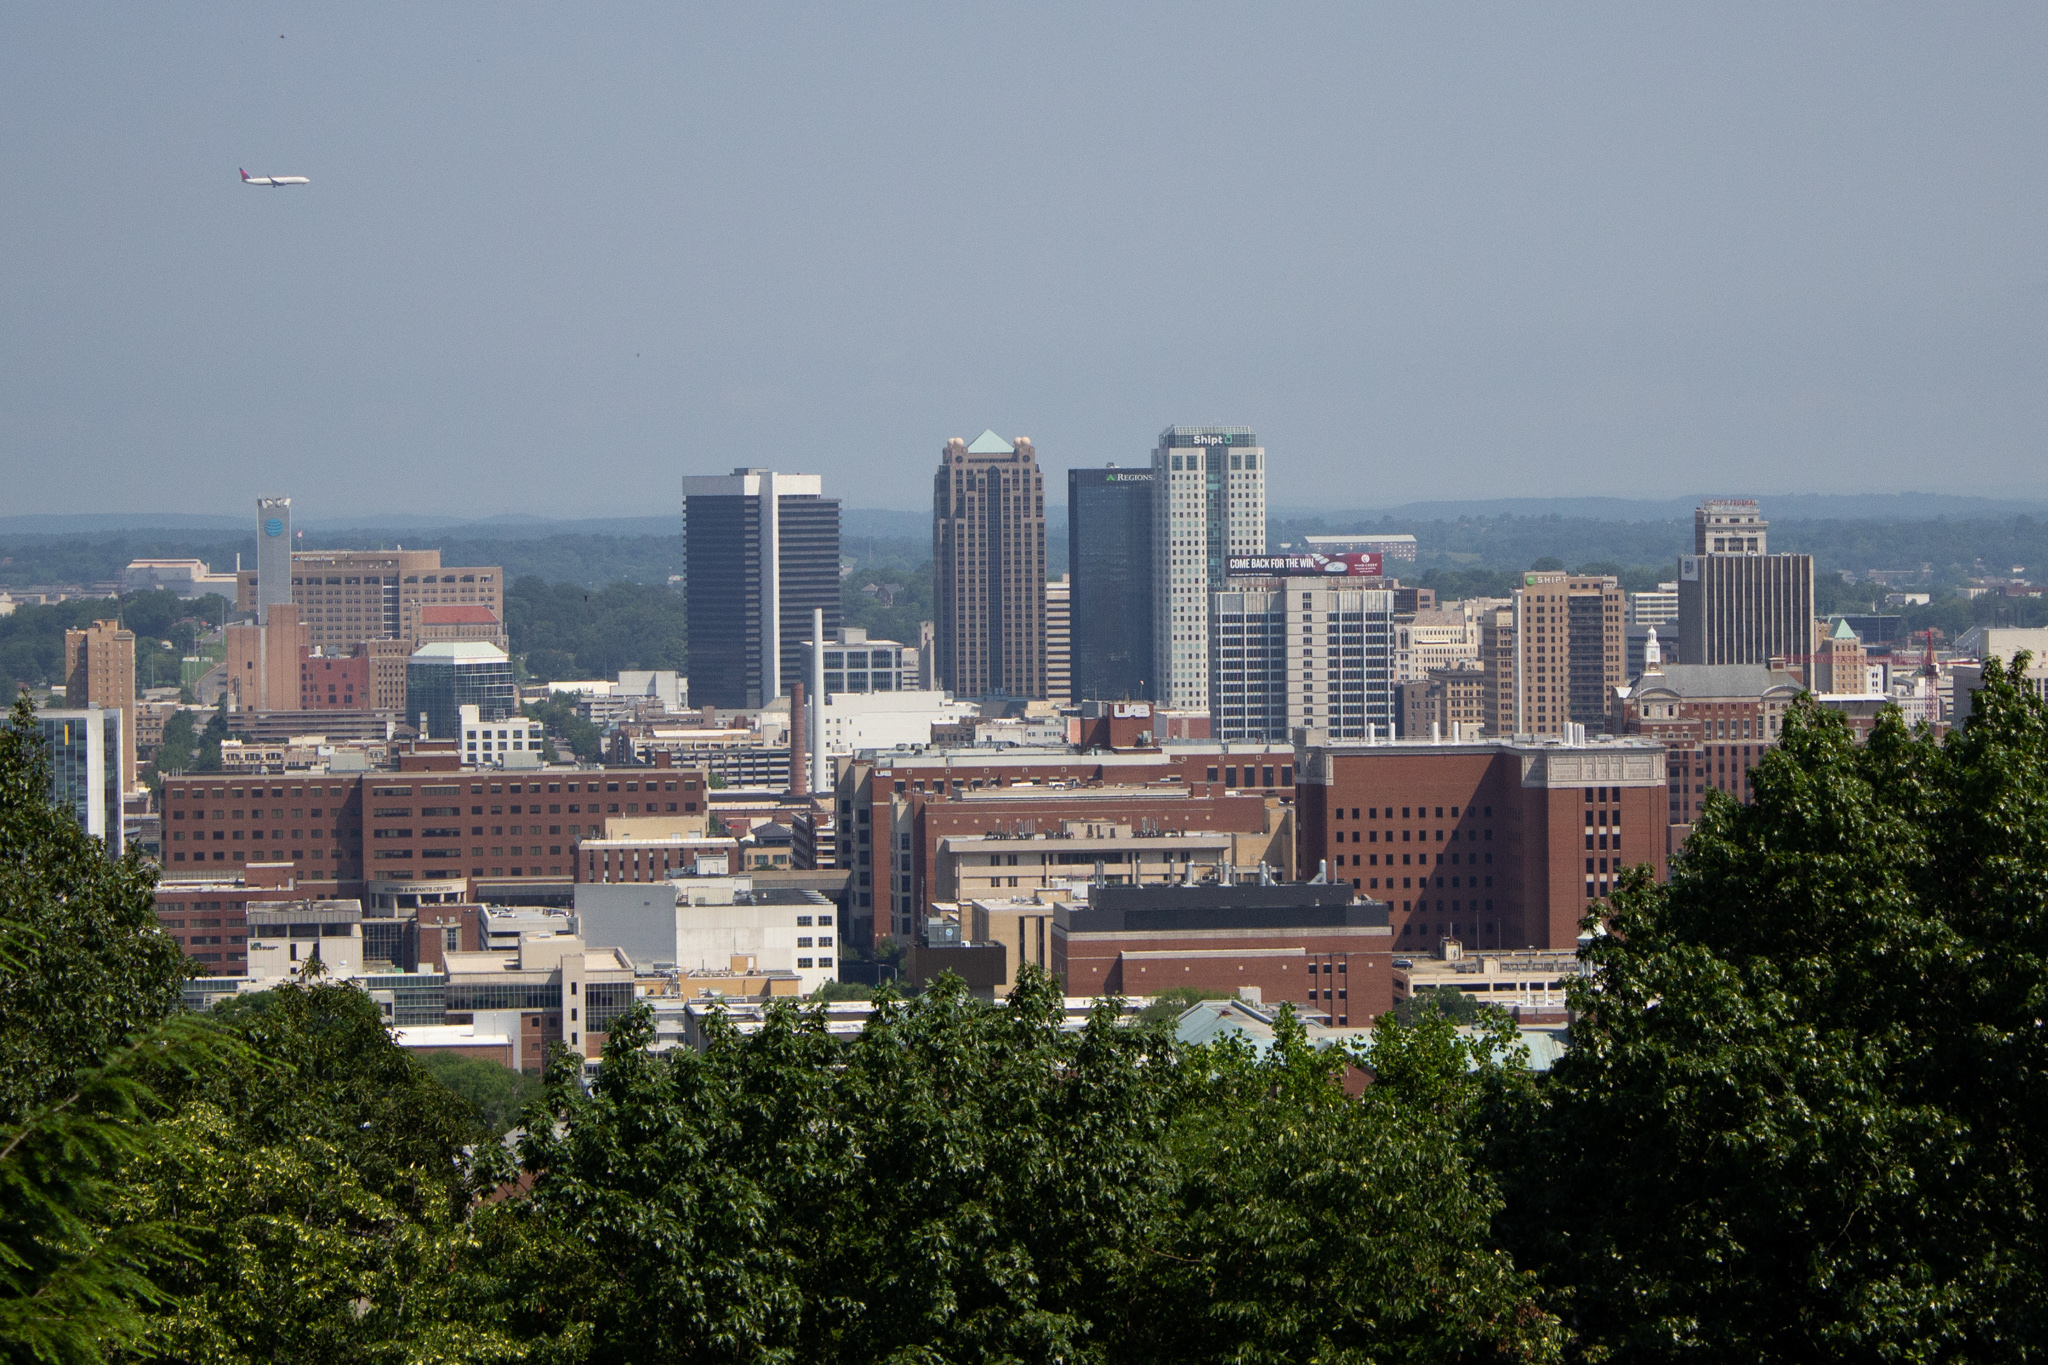 Birmingham may be 150 this year, but the Magic City is looking better than ever! Photo by Libby Foster for Bham Now.